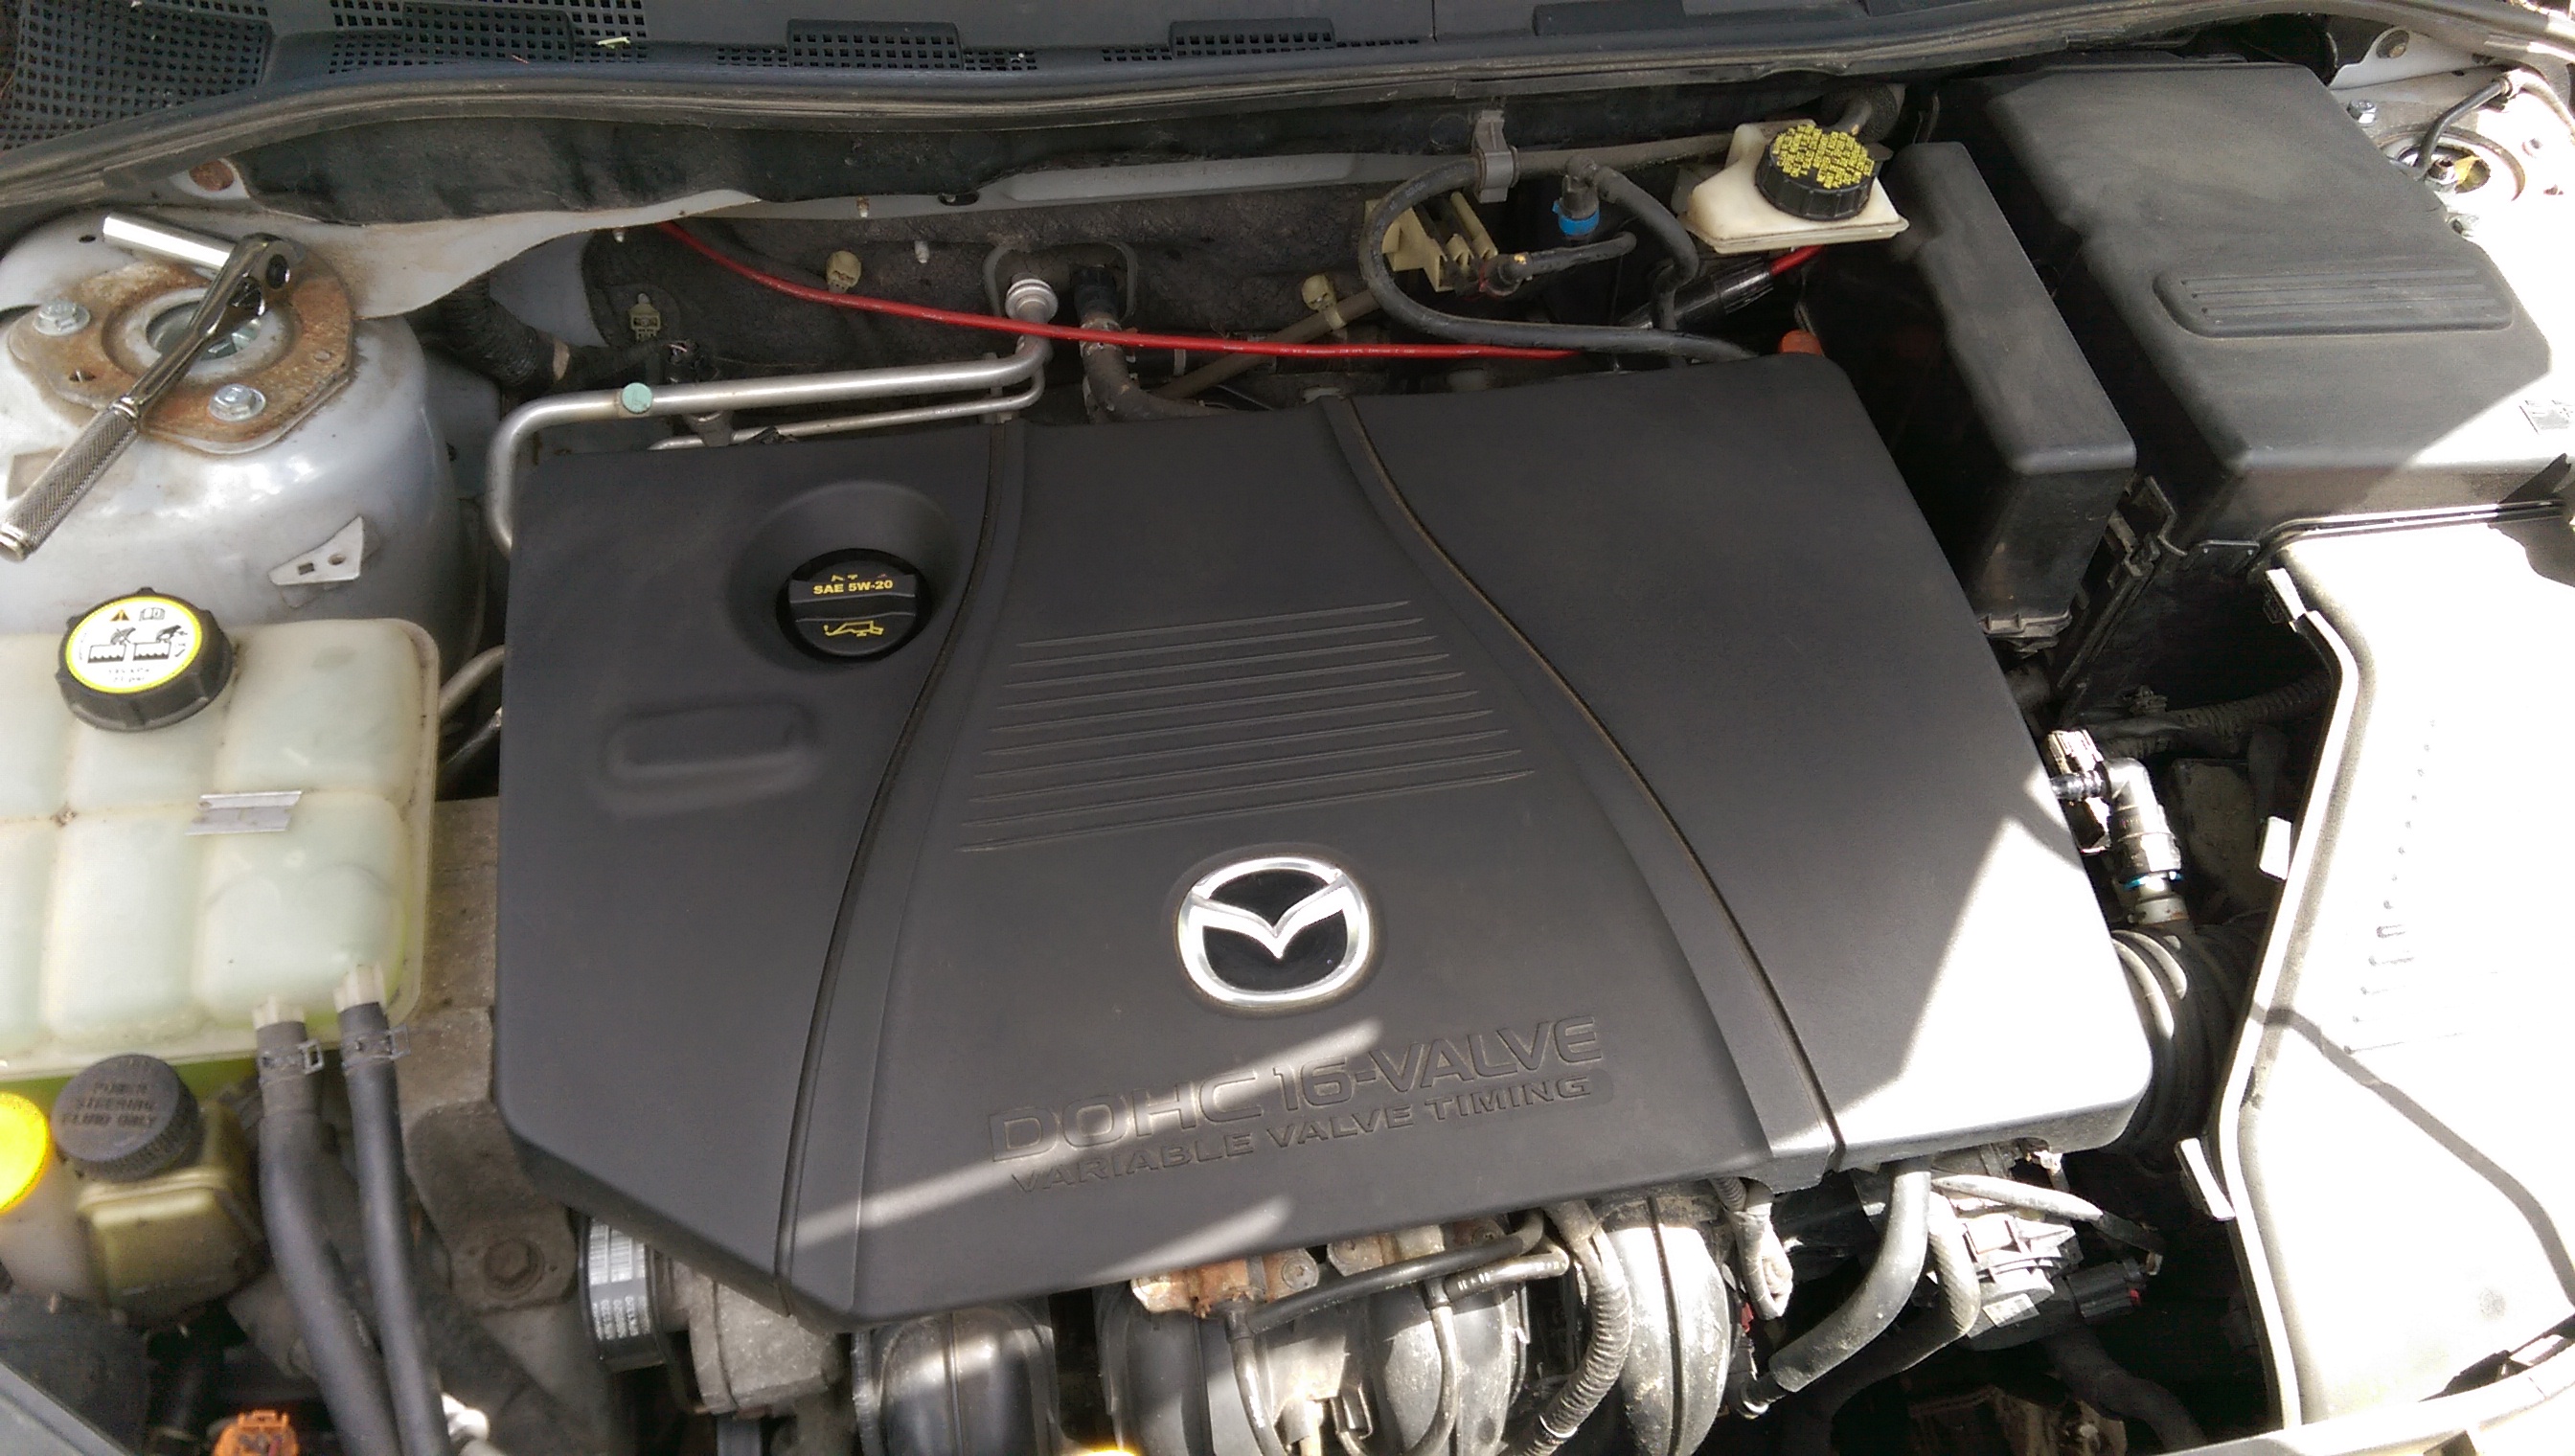 Mazda 3 – Valve Cover Gasket Replacement